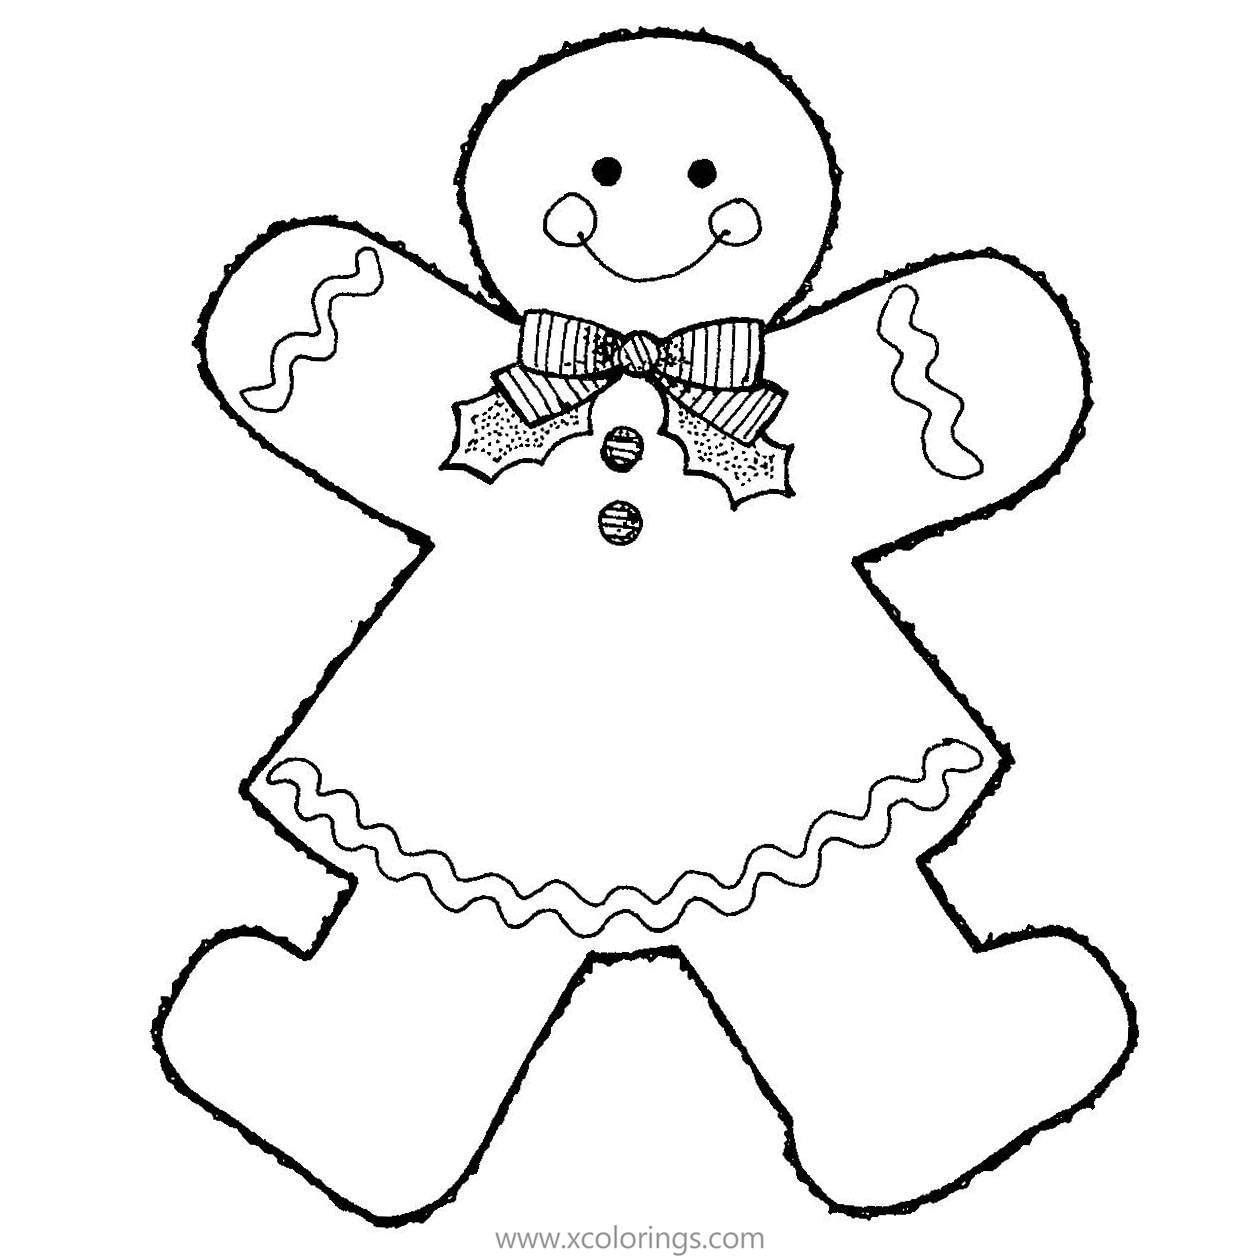 Free Decorate Gingerbread Man Coloring Pages for Girl printable